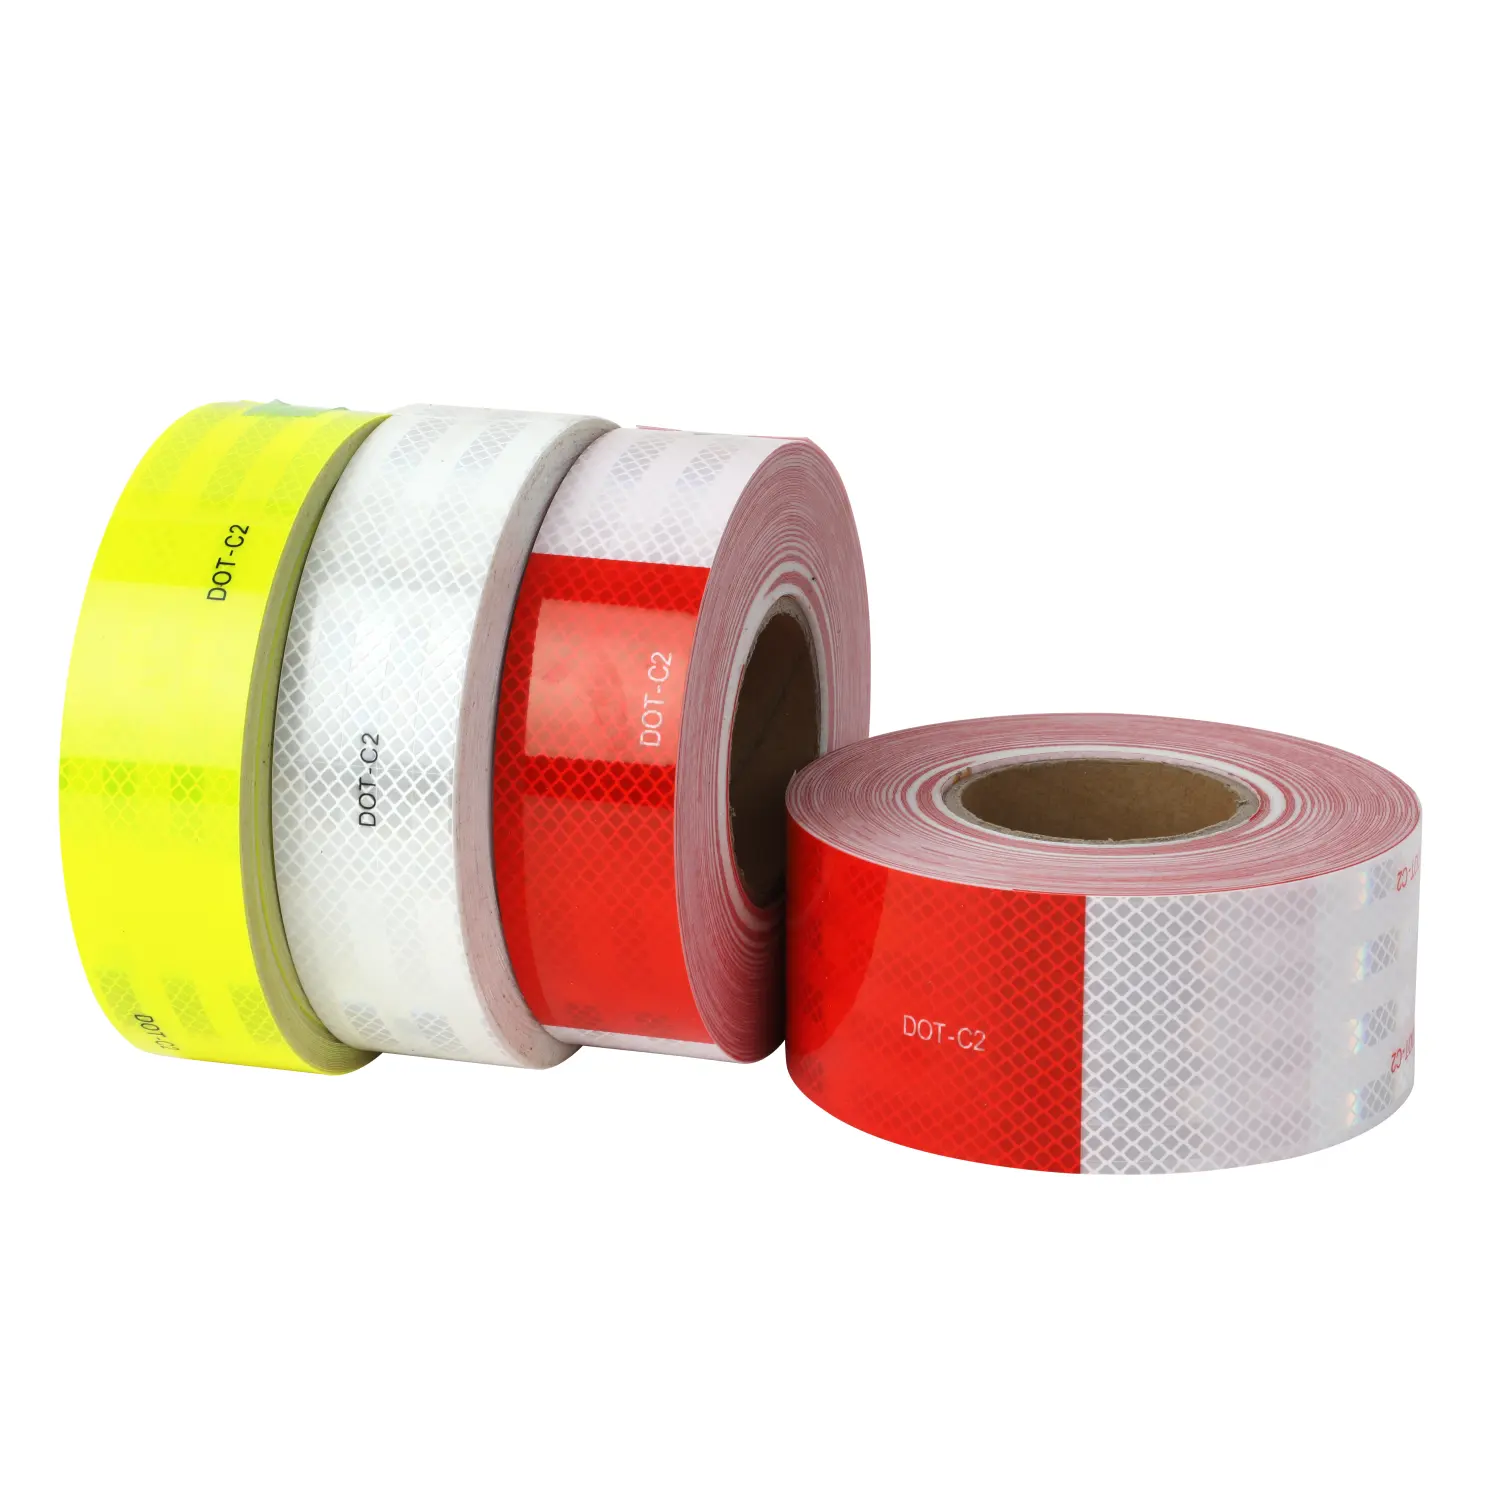 High Visibility PC/Acrylic Red White DOT-C2 Reflective Safety Conspicuity Tape Reflector Stickers for Trailers Truck Vehicles